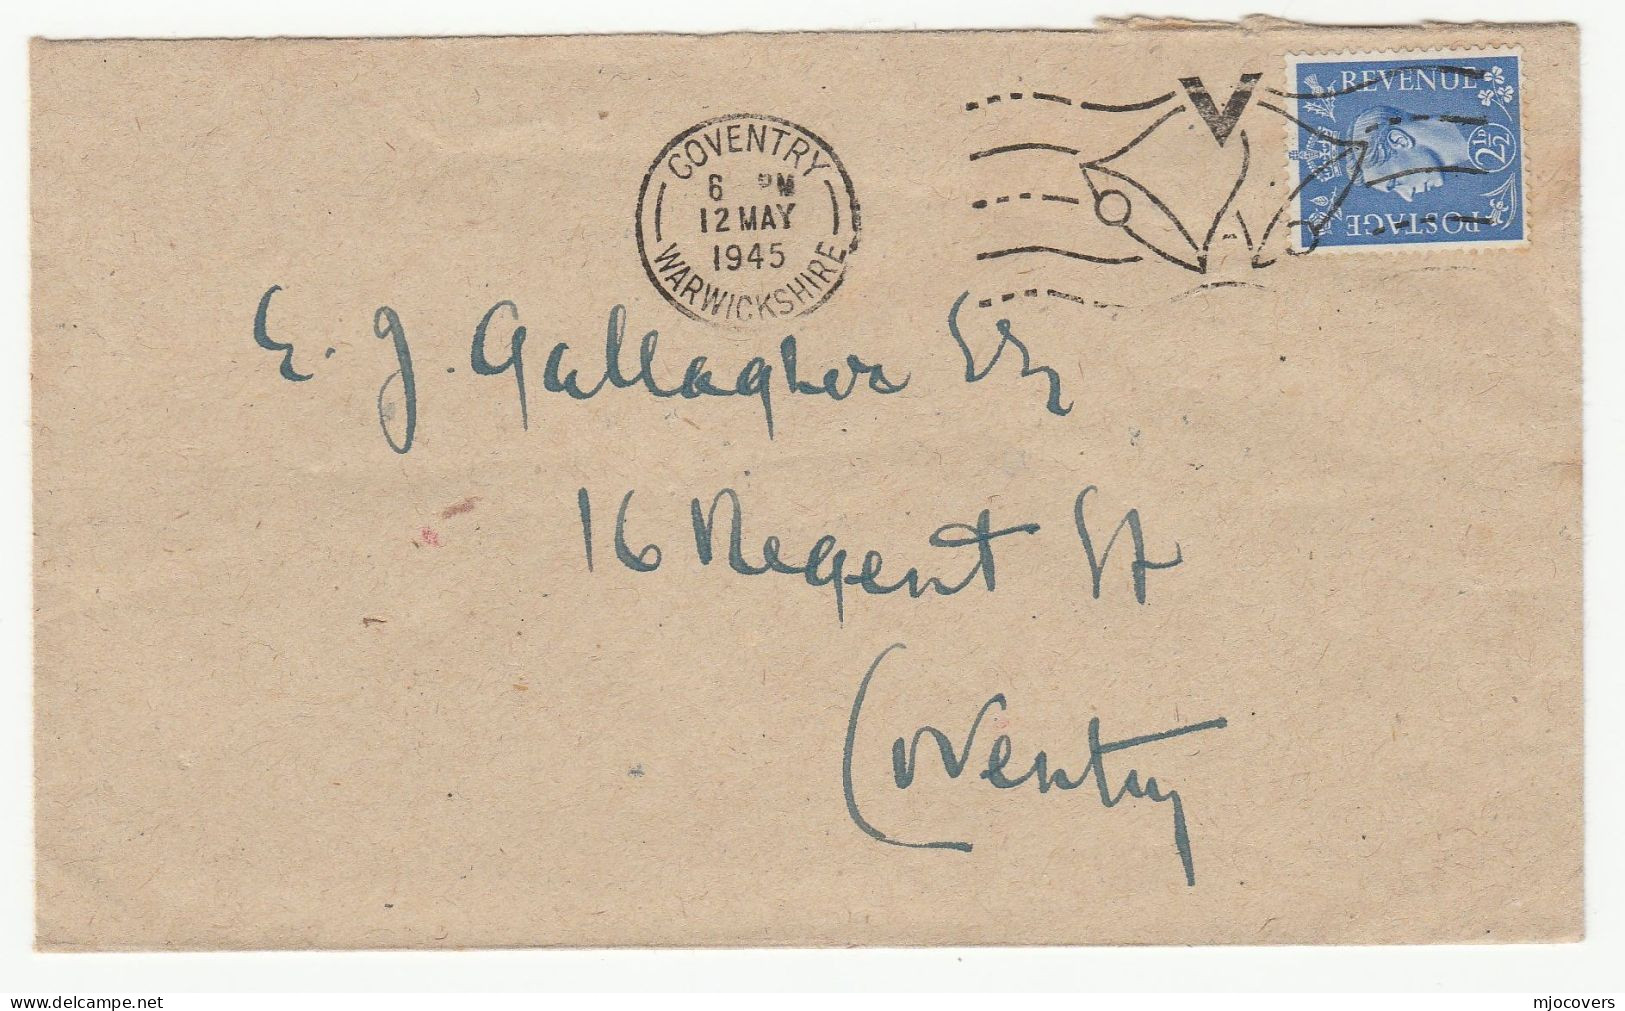 WWII Victory 1945 GB Cover 'V' Victory BELLS Slogan Coventry GB Gvi Stamps - Covers & Documents